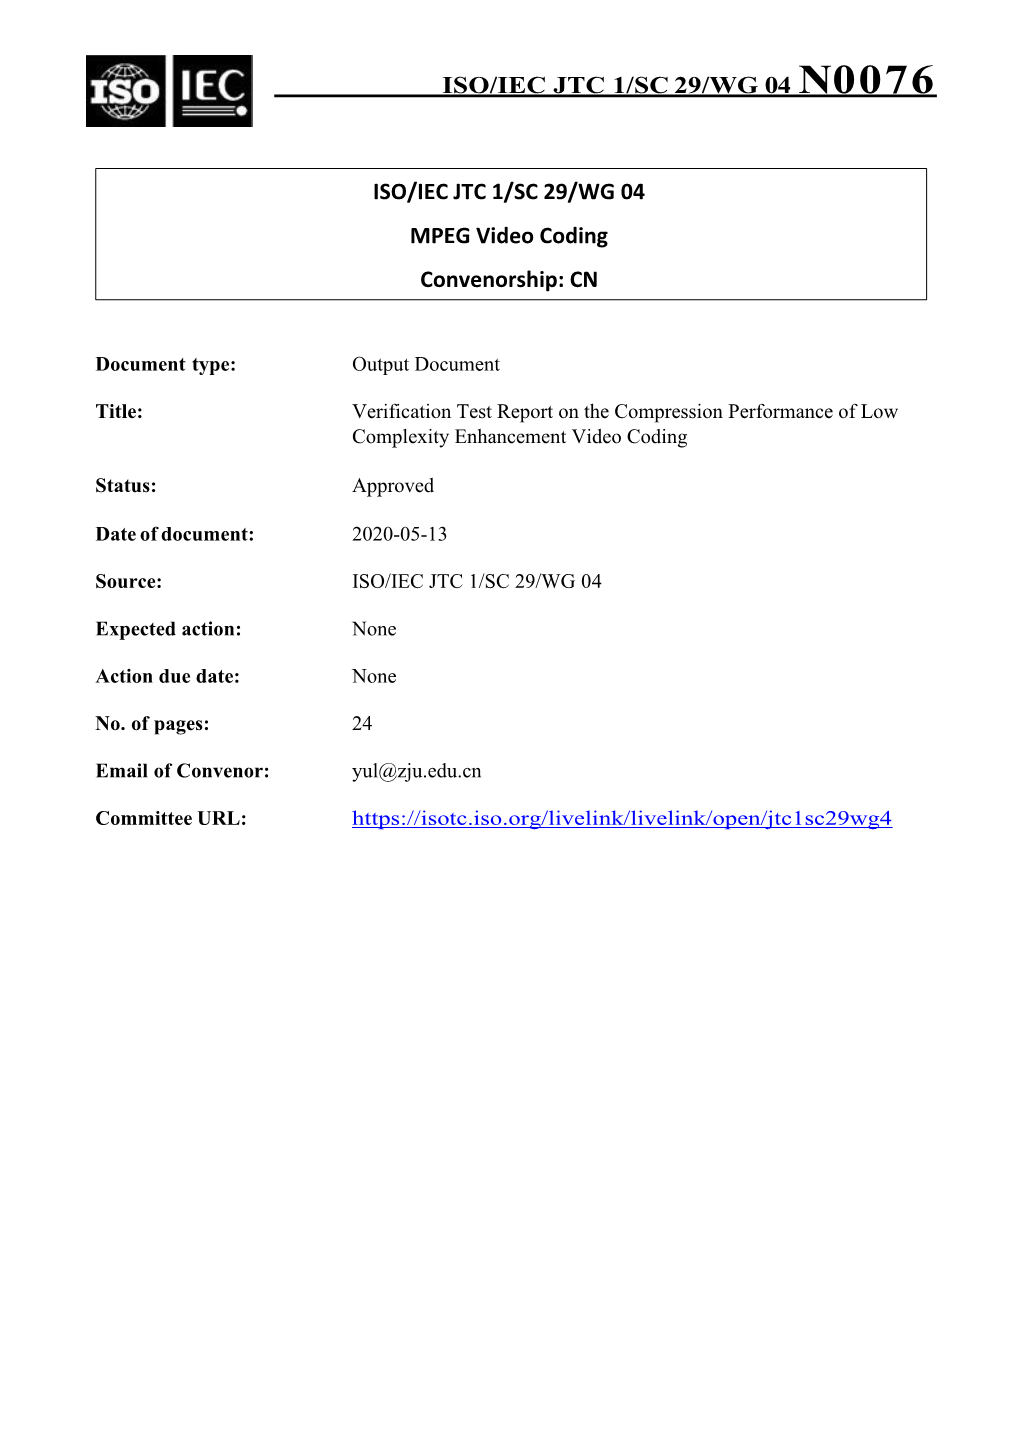 MPEG Verification Test Report on the Compression